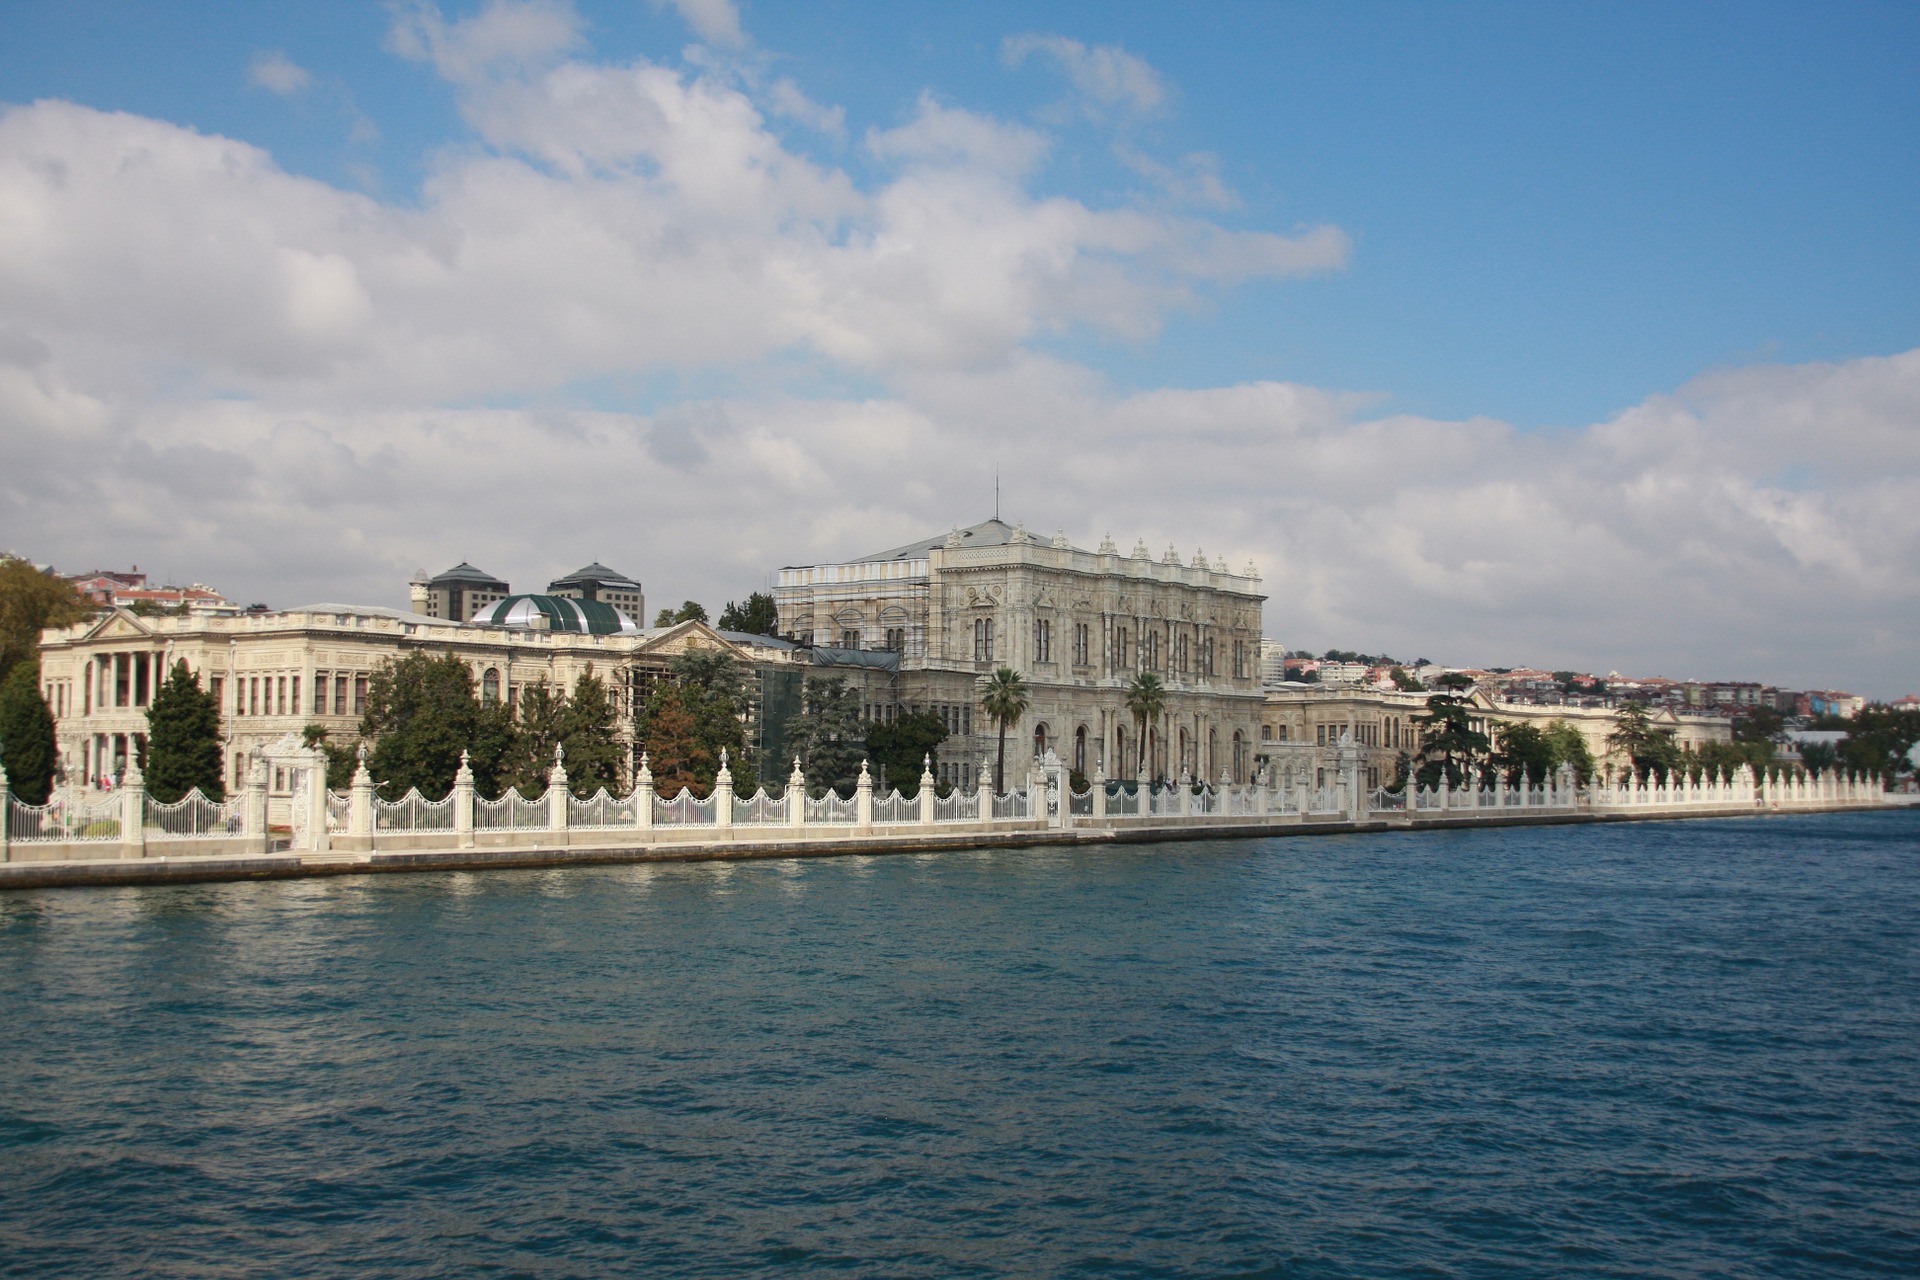 Dolmabahçe (Dolmabahce) Palace in Istanbul, Turkey